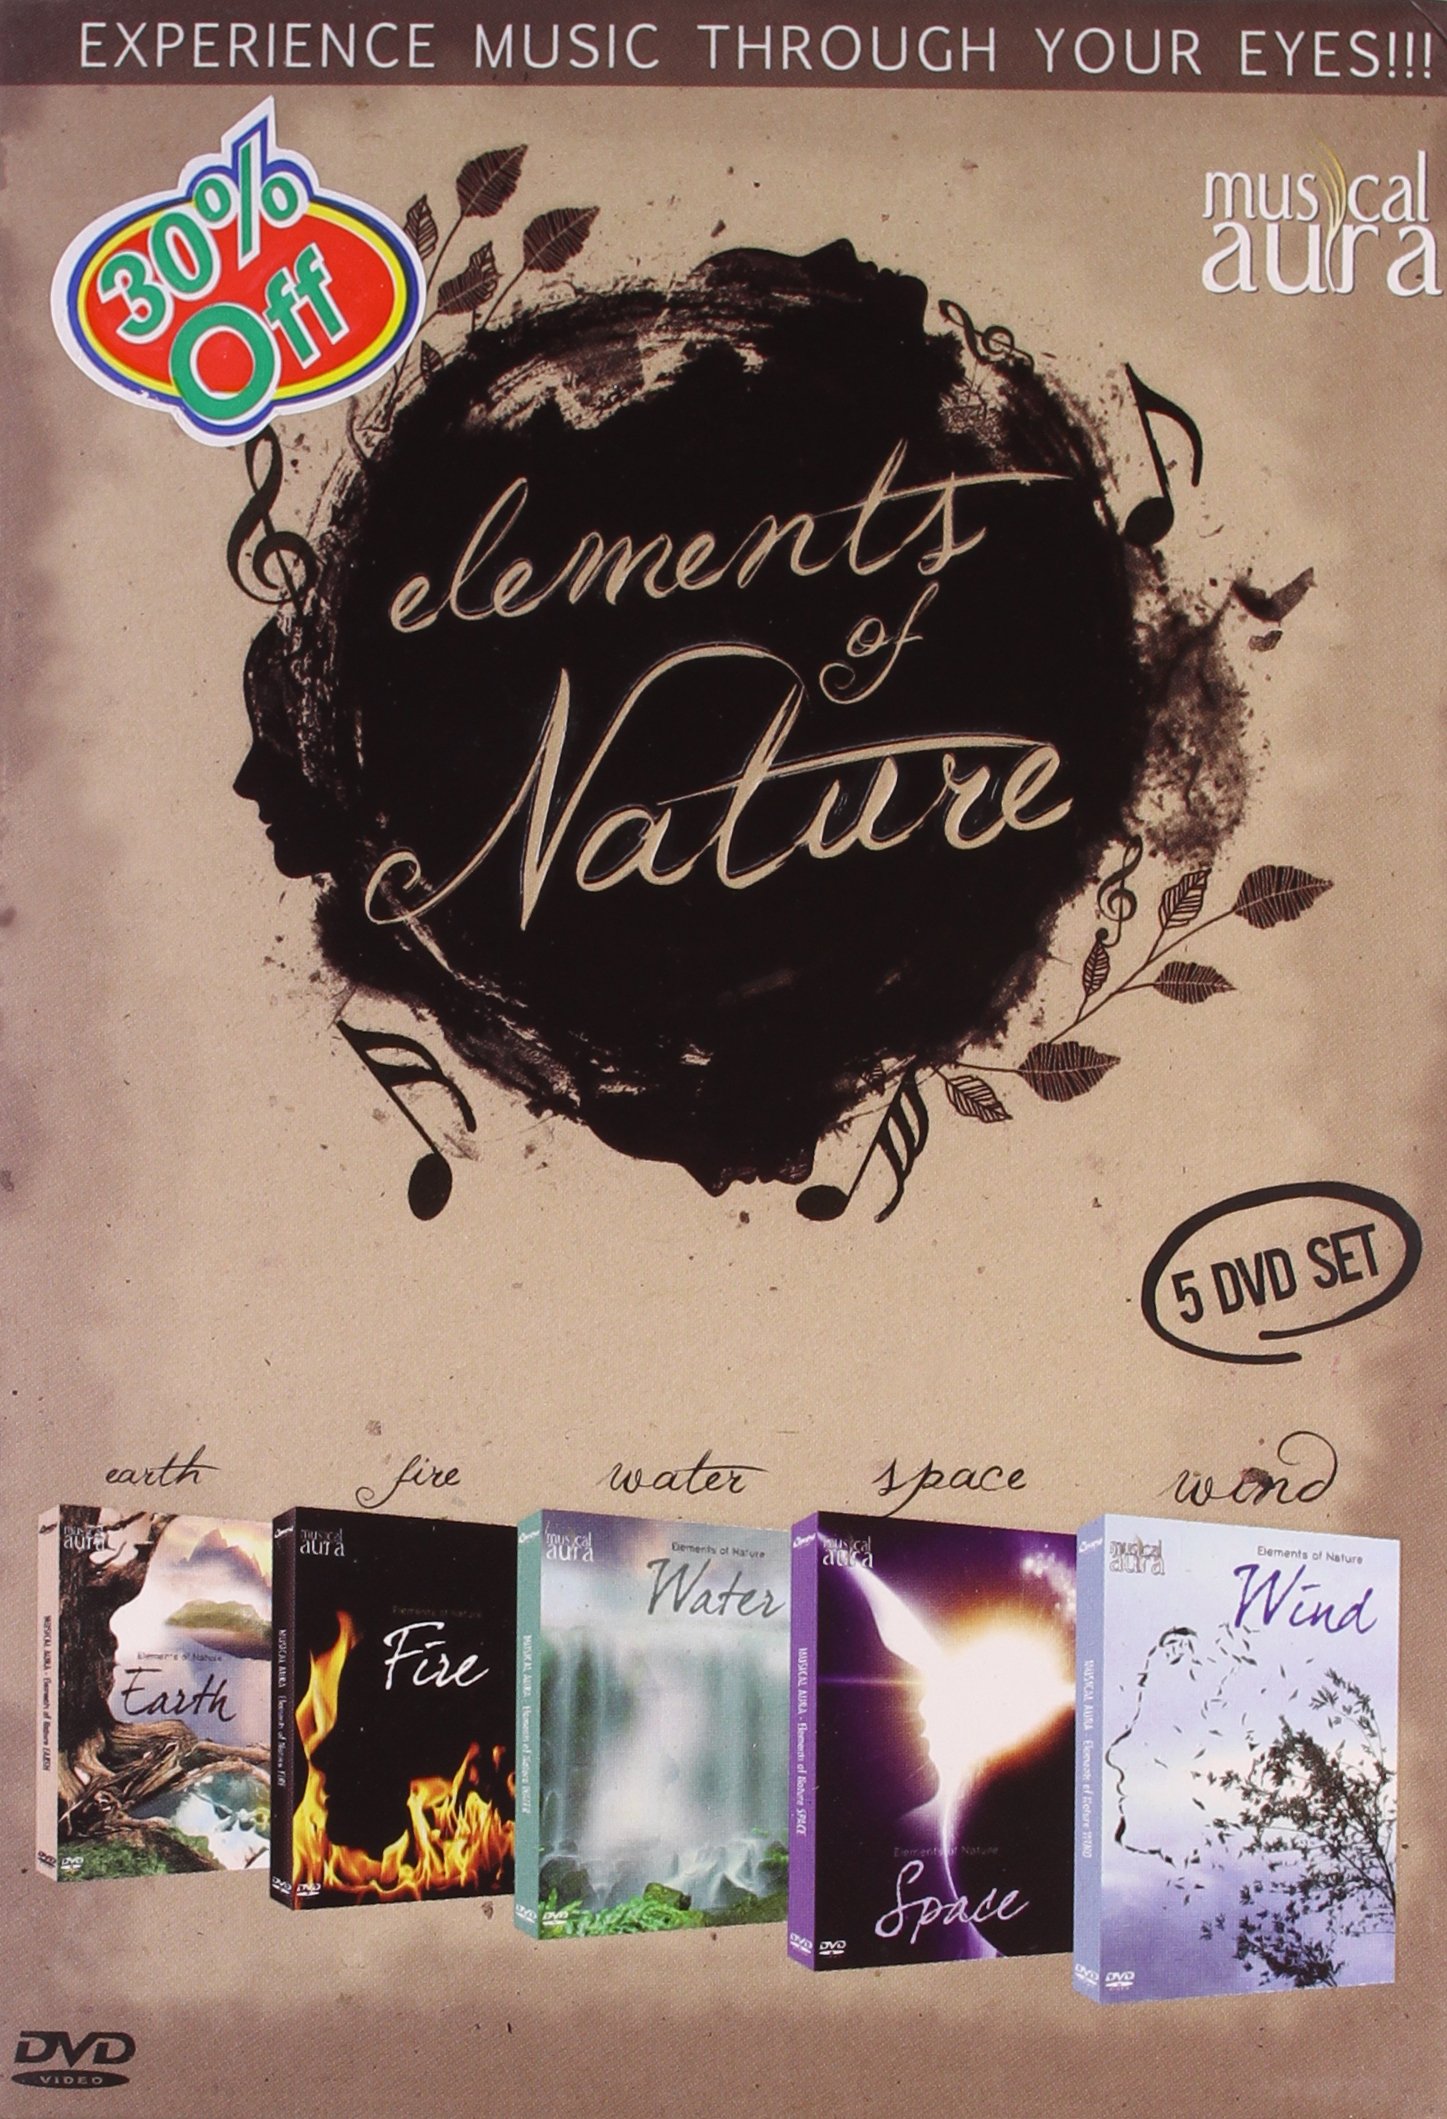 musical-aura-elements-of-nature-movie-purchase-or-watch-onli